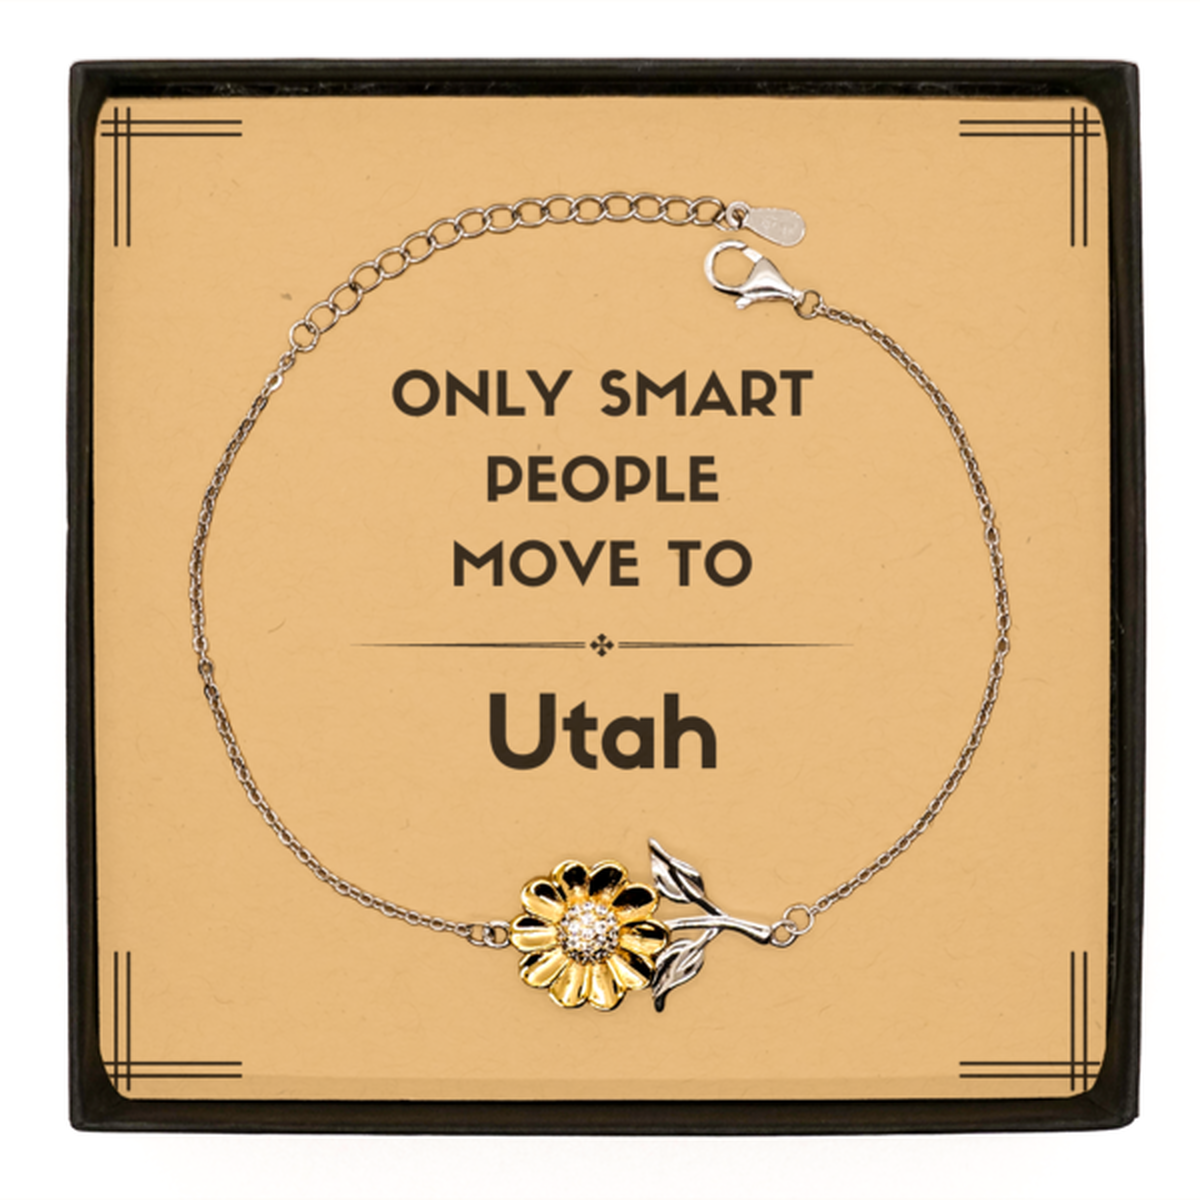 Only smart people move to Utah Sunflower Bracelet, Message Card Gifts For Utah, Move to Utah Gifts for Friends Coworker Funny Saying Quote